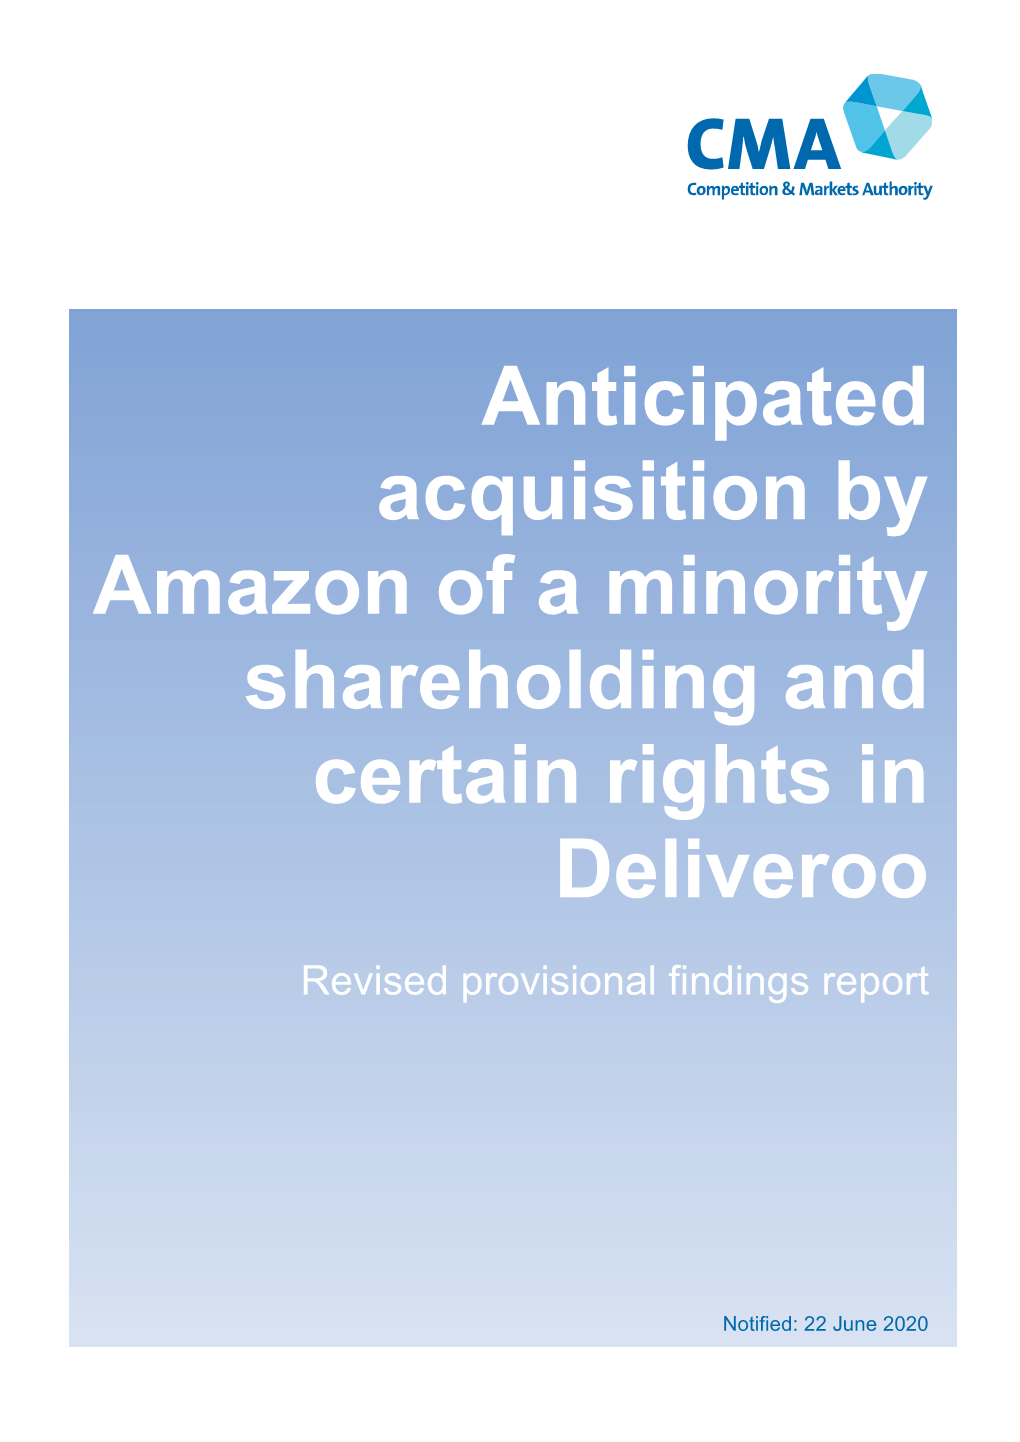 Revised Provisional Findings Report